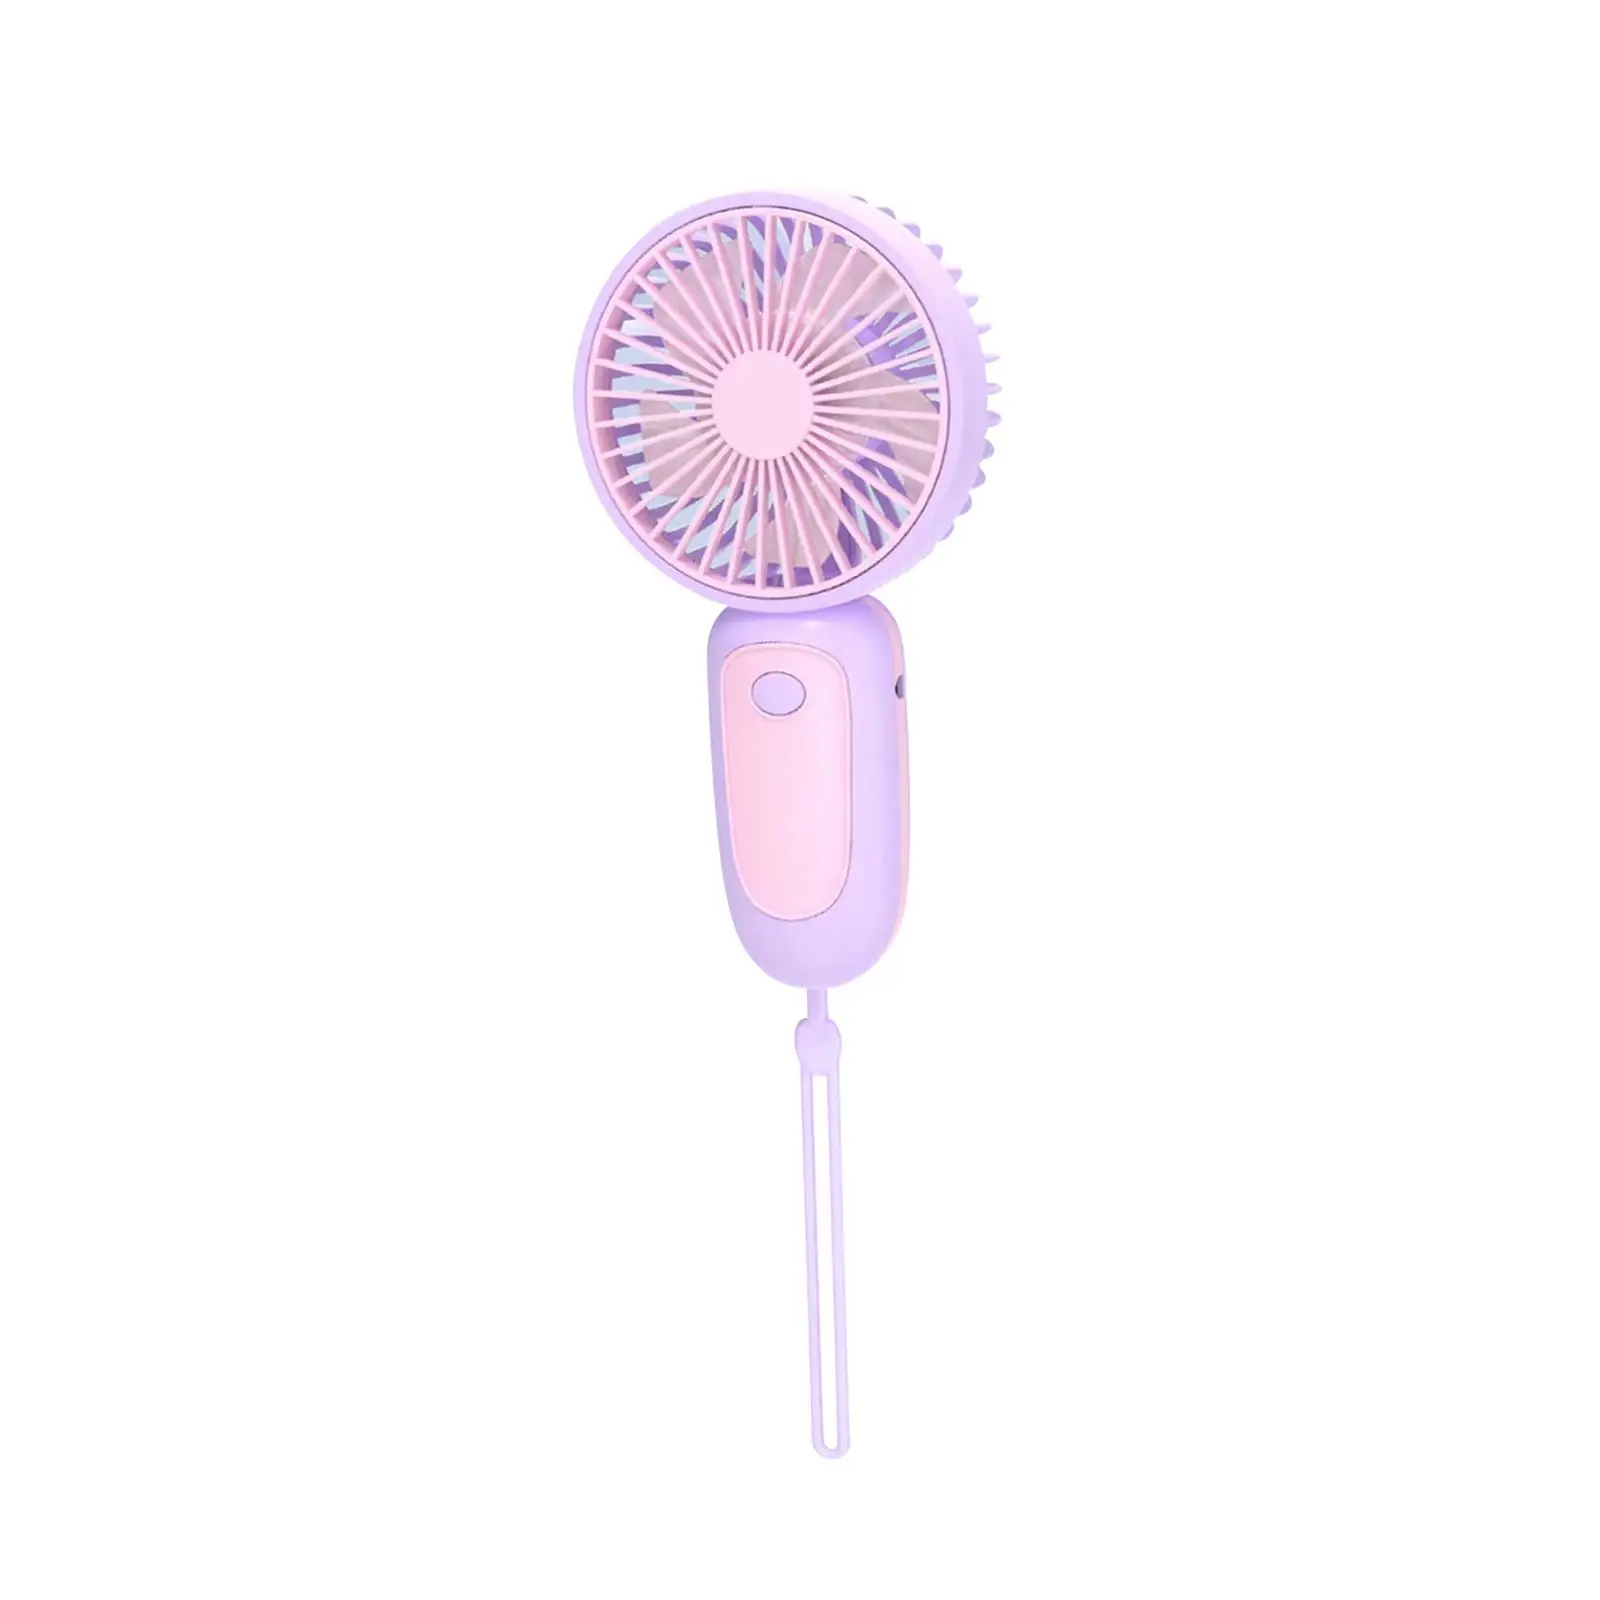 Low Noise USB Handheld Fan Cooling Fan Rechargeable Electric Birthday Gift for Office